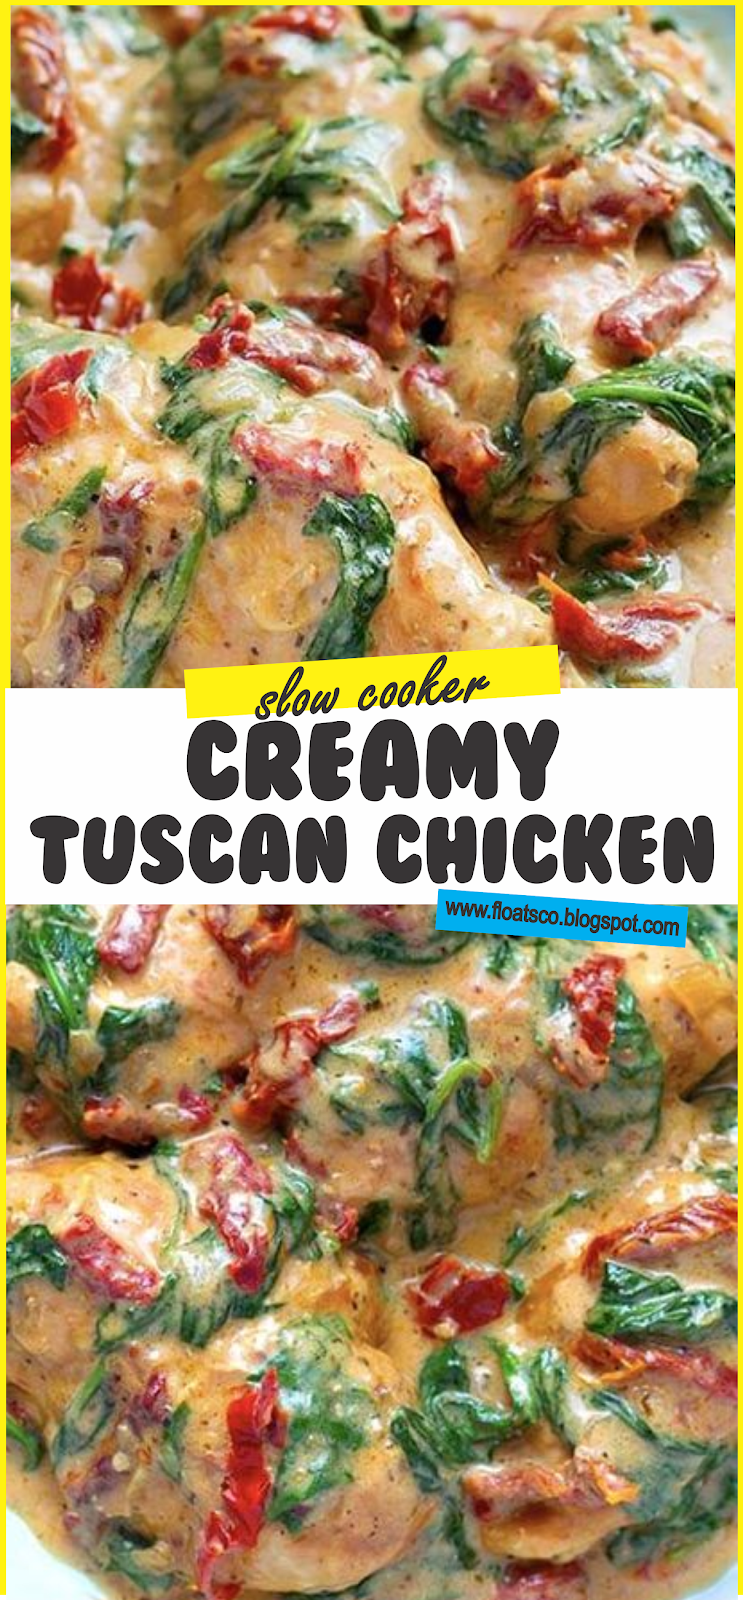 Slow Cooker Creamy Tuscan Chicken | Floats CO